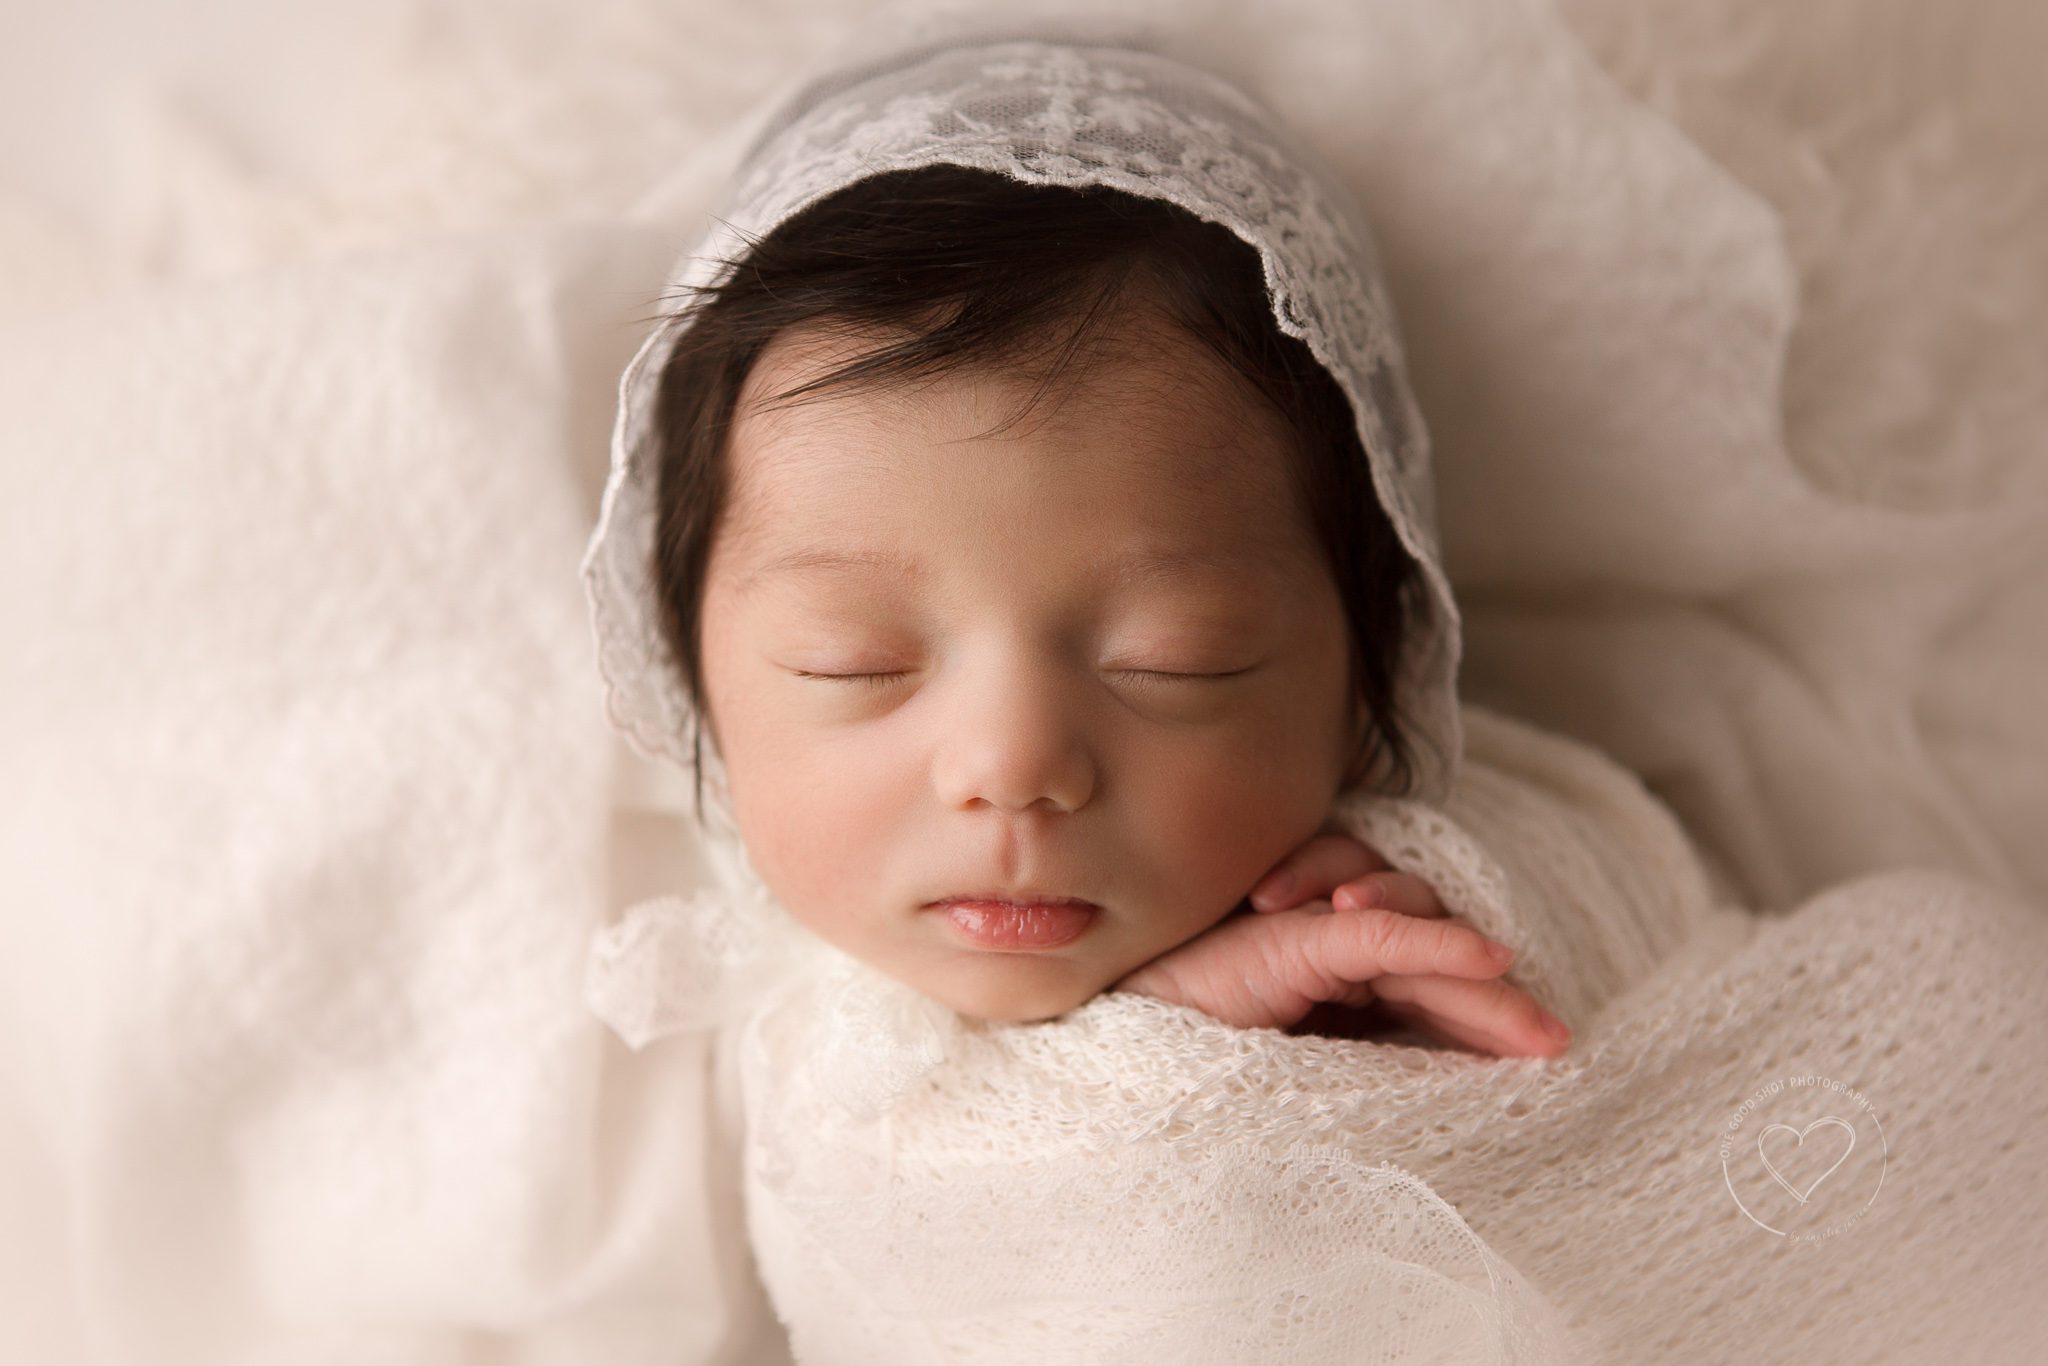 Fresno Newborn Photographer, Baby girl wearing lace bonnet, wrapped in white with hands showing